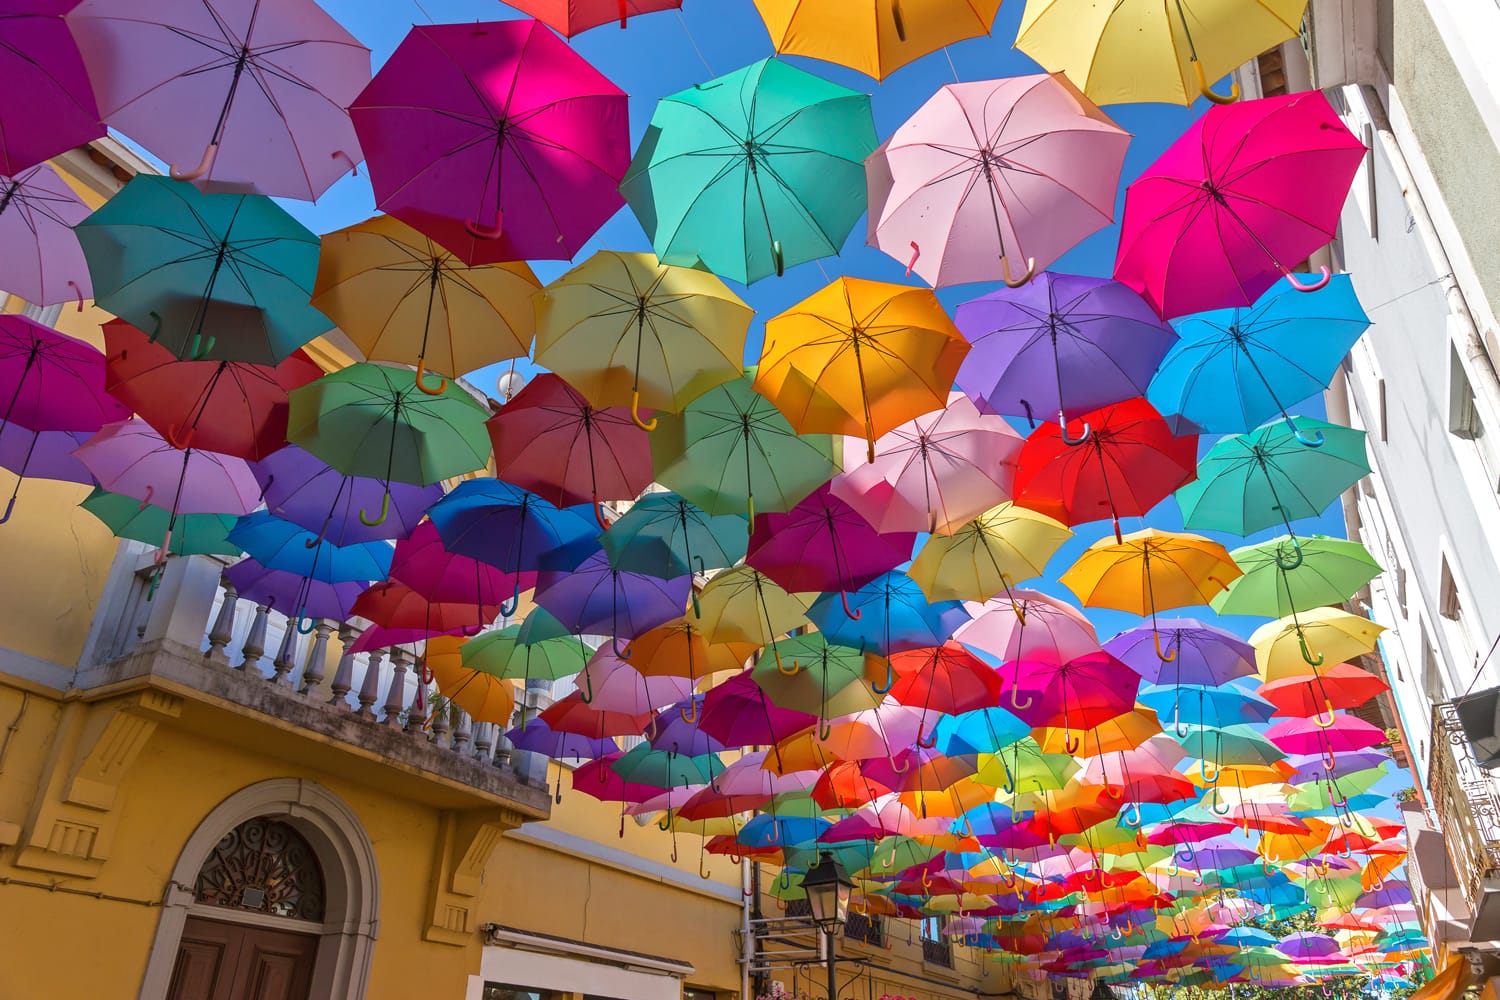 Umbrella Sky Project in Agueda, Aveiro district, Portugal